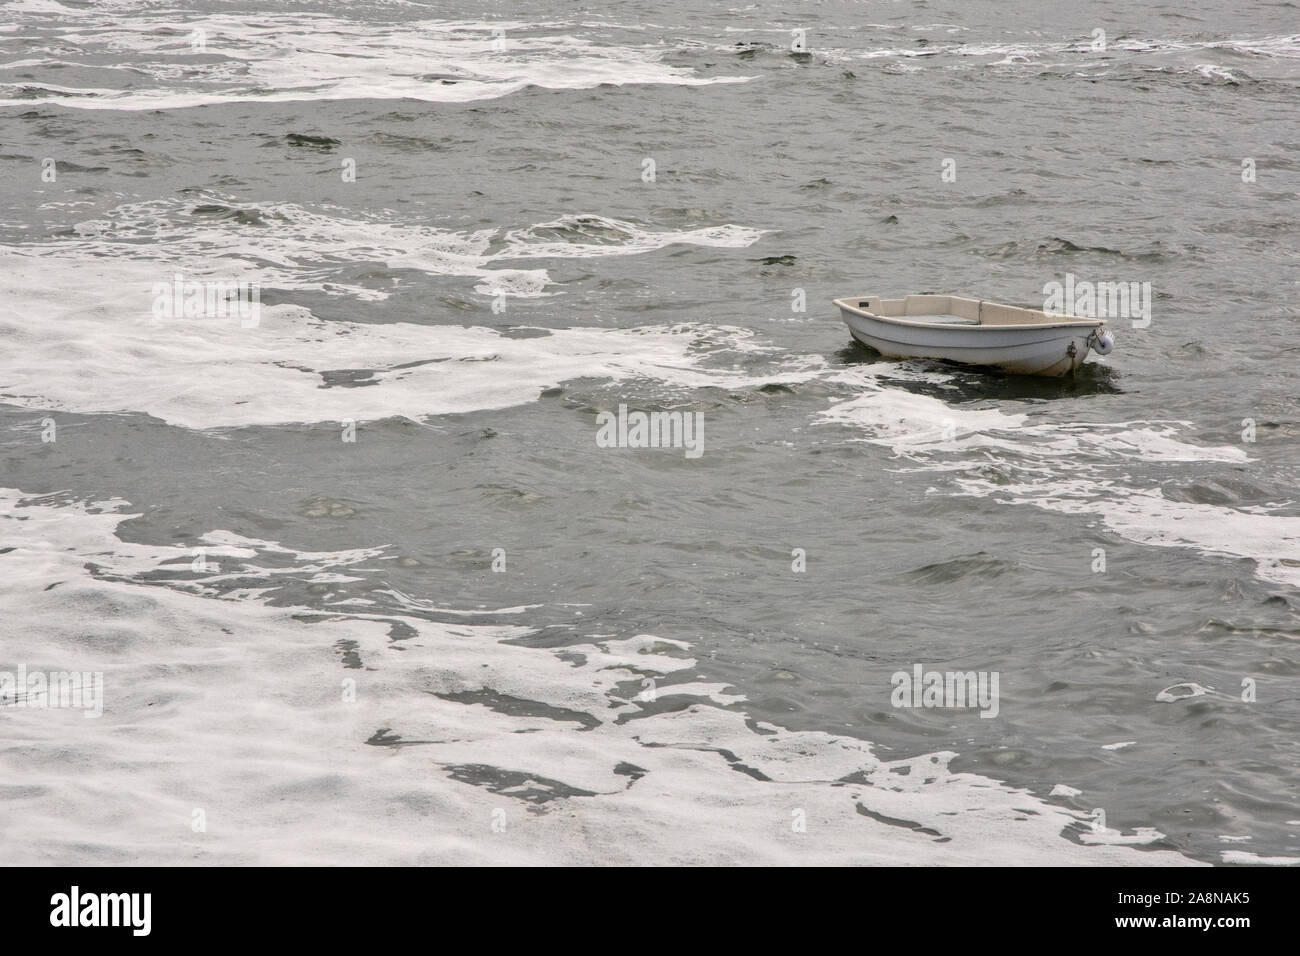 Oceans during a storm are very active and recreational to watch. Stock Photo